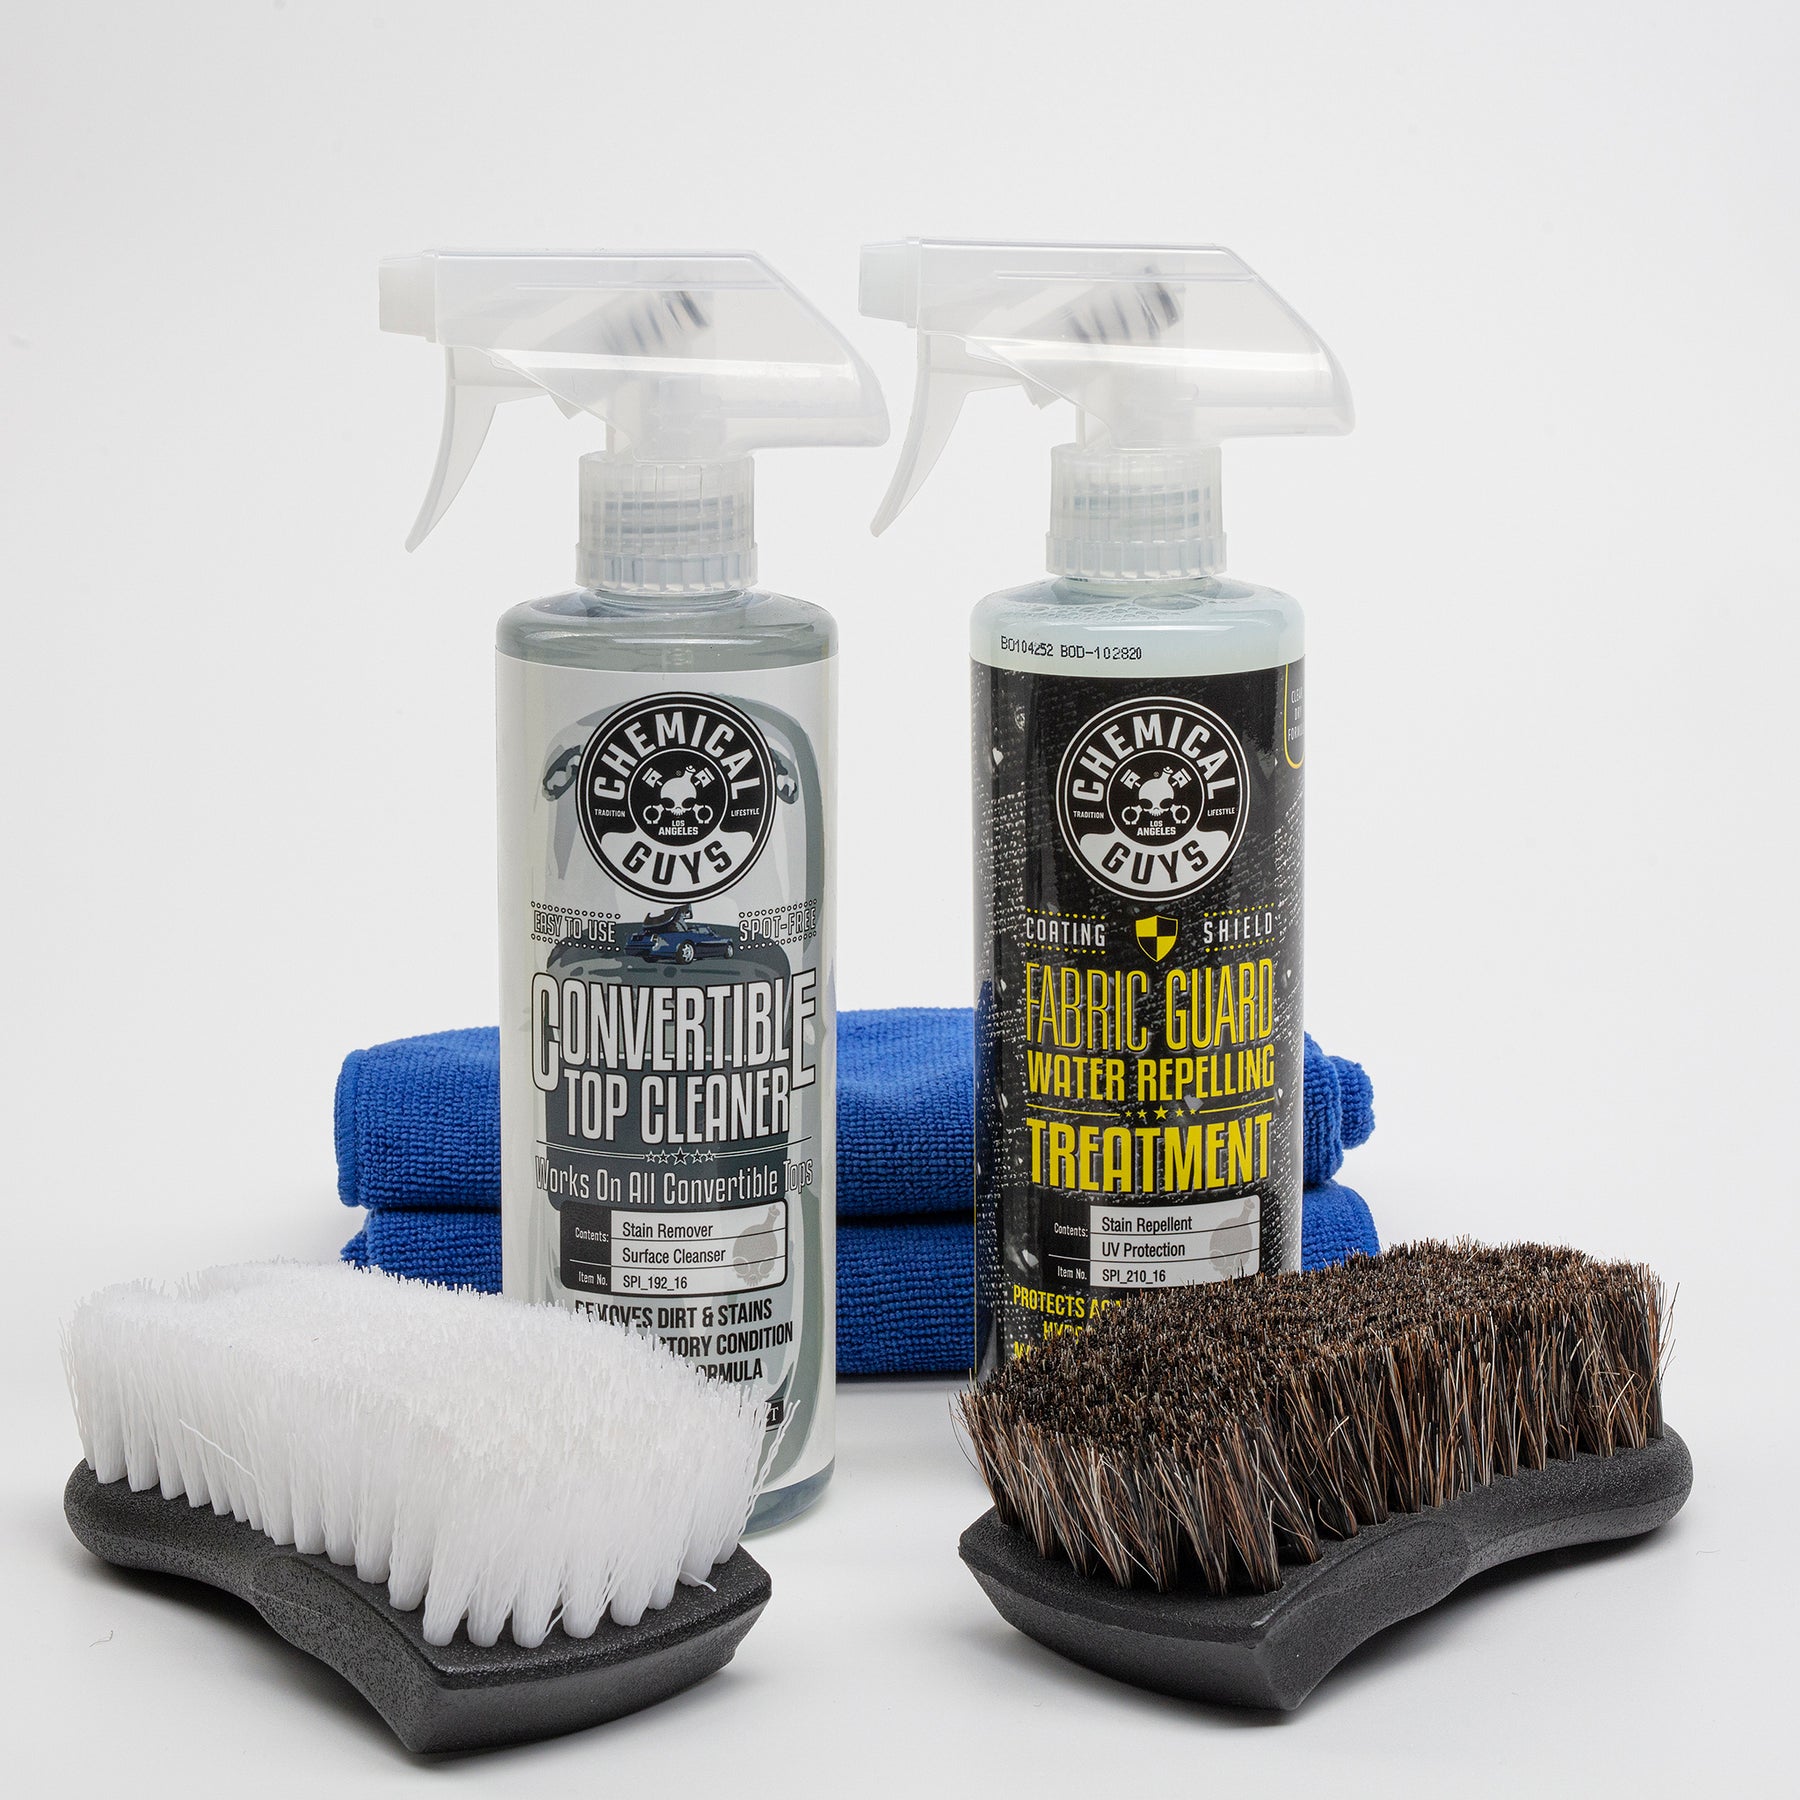 Exterior Soft Leather/Convertible Top Cleaning Brush